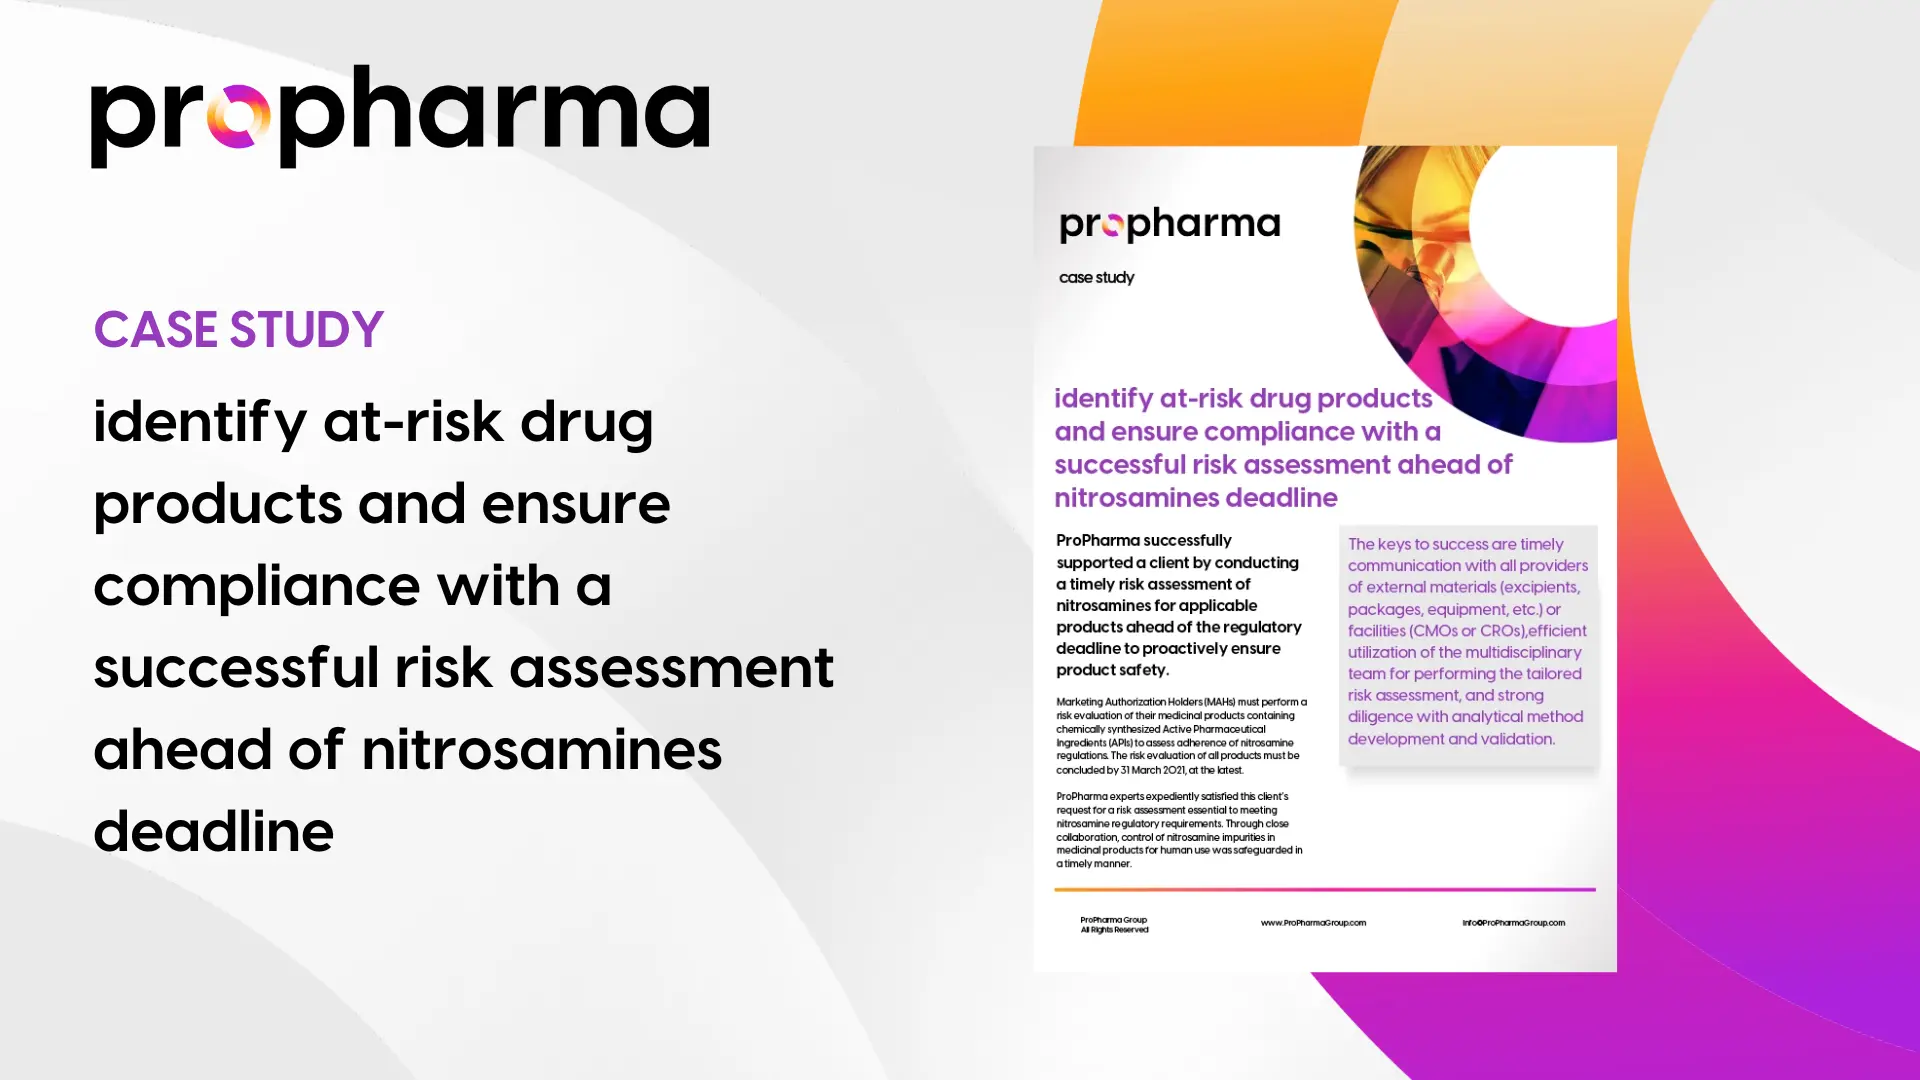 Identify At-Risk Drug Products and Ensure Compliance Before Nitrosamines Deadline